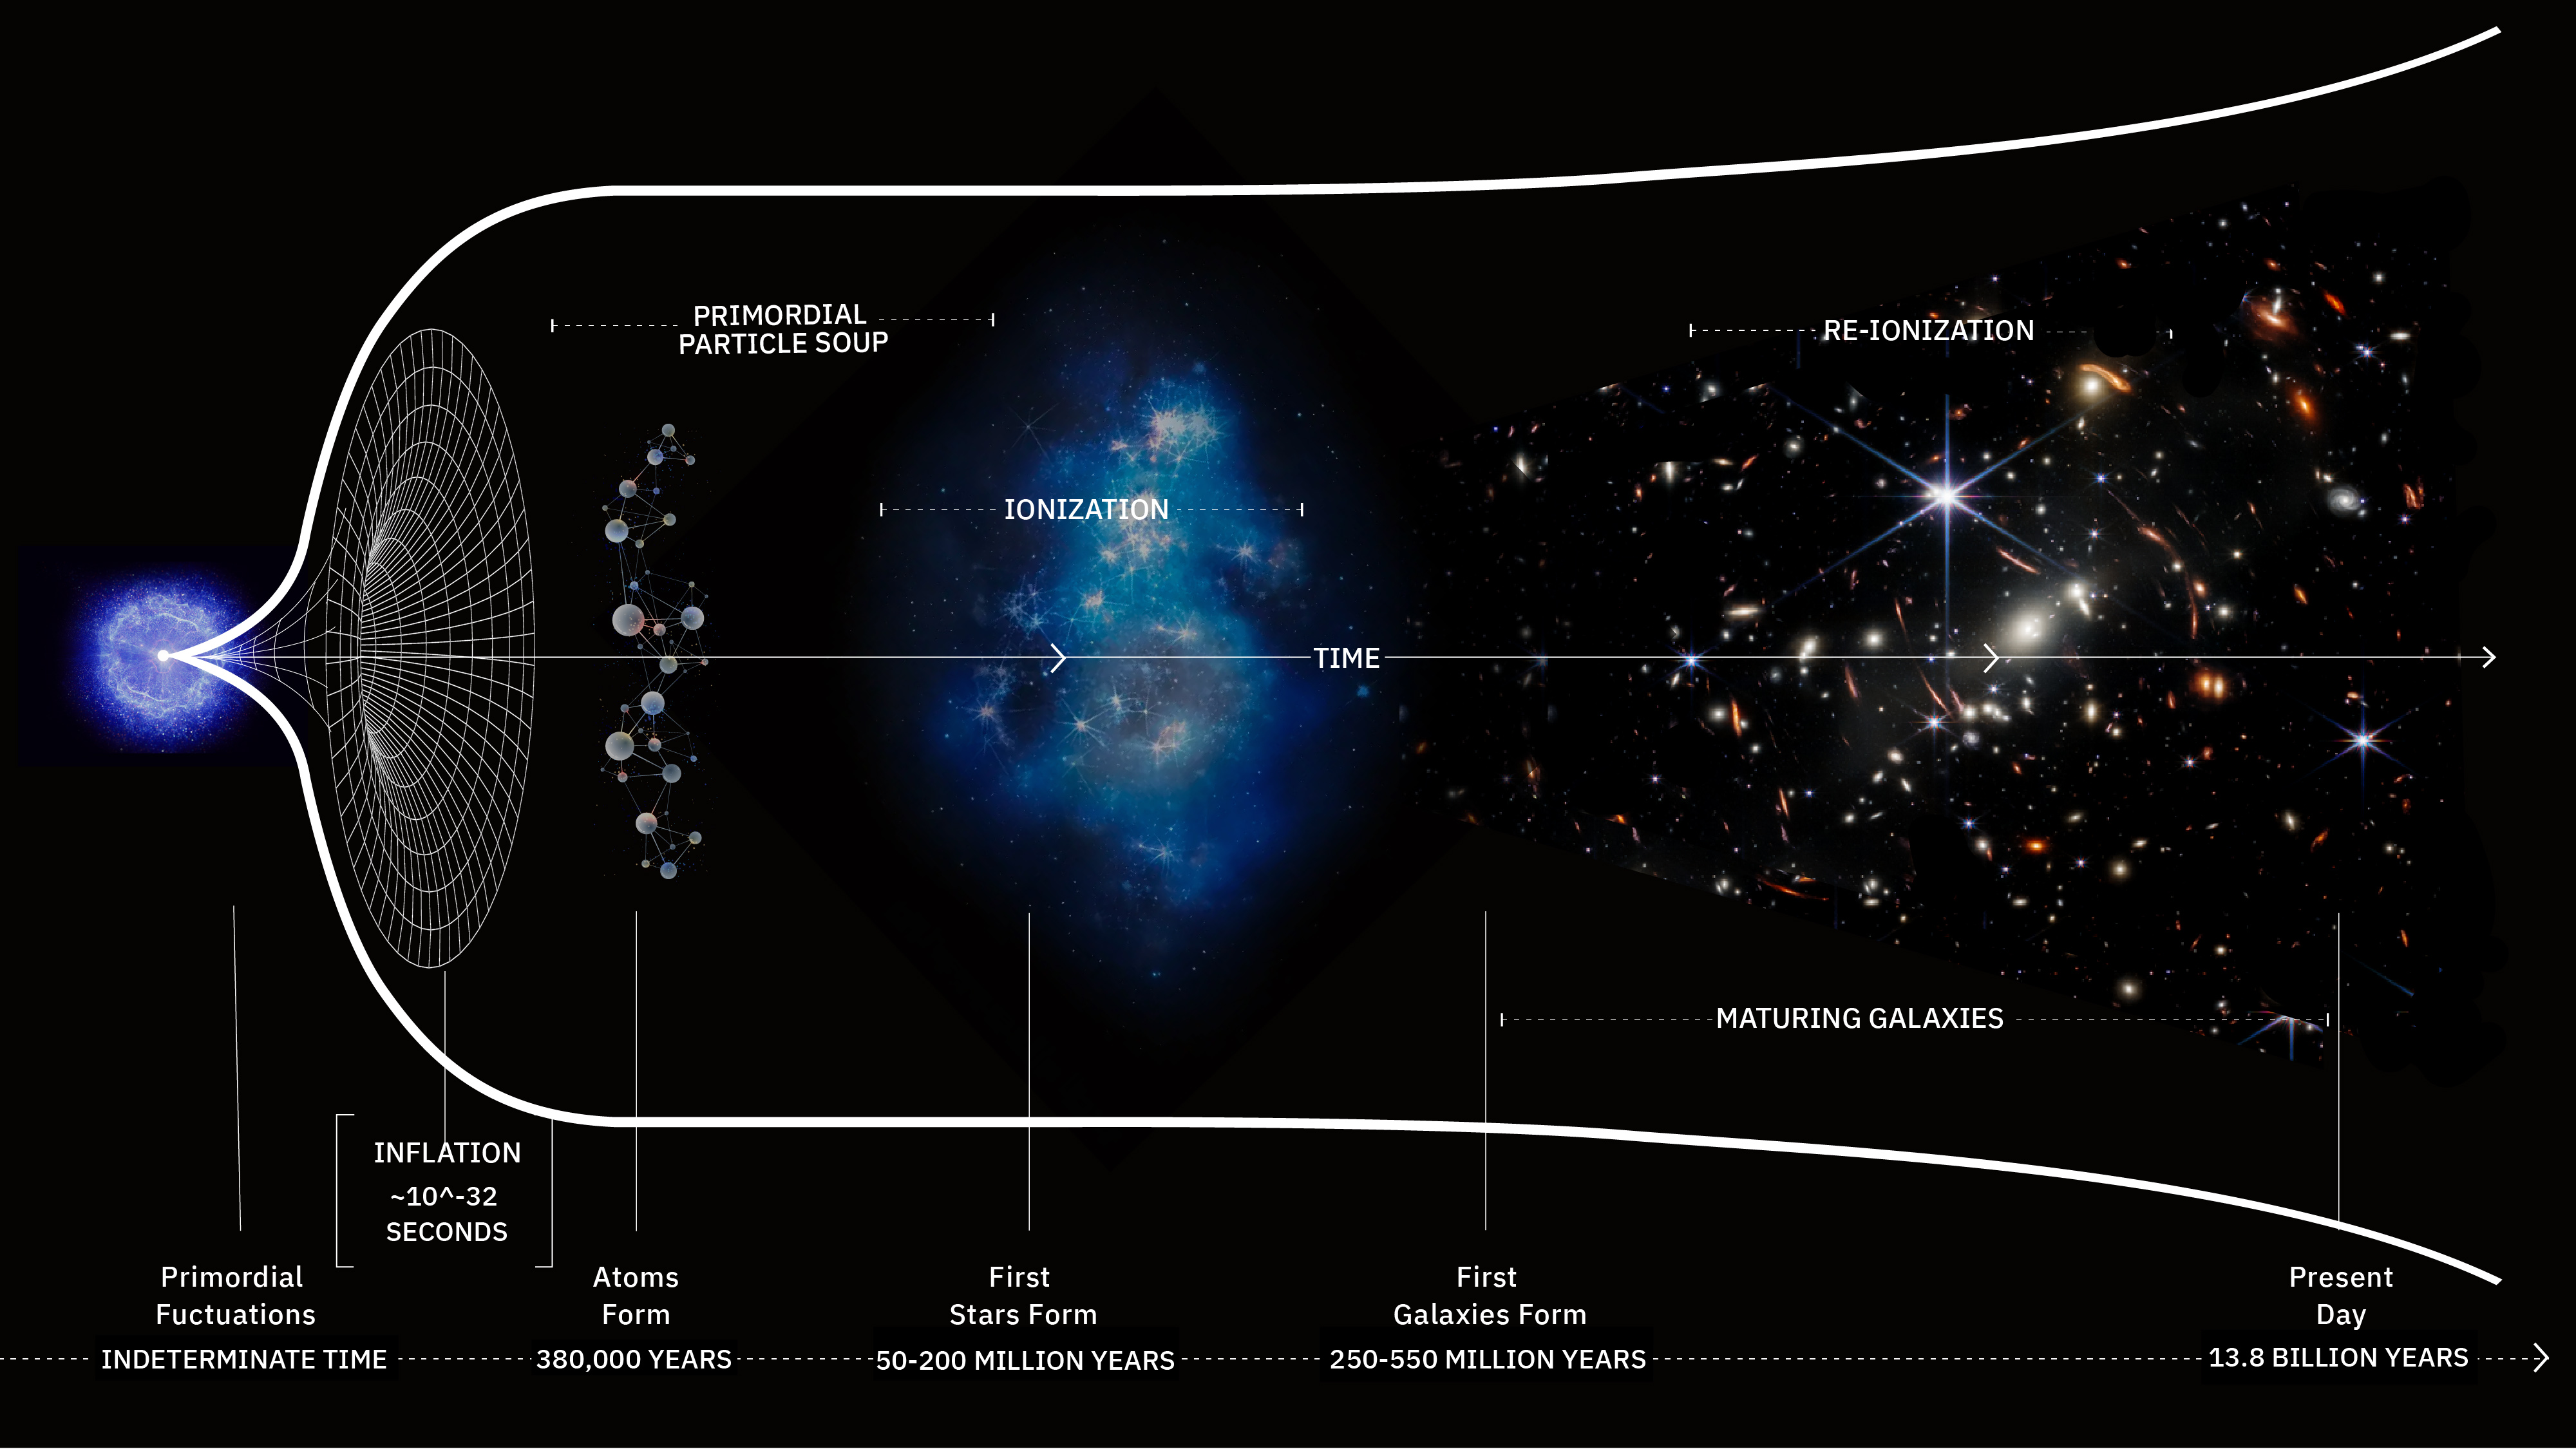 Visualization of the timeline of the universe, from the beginning big bang to the present.